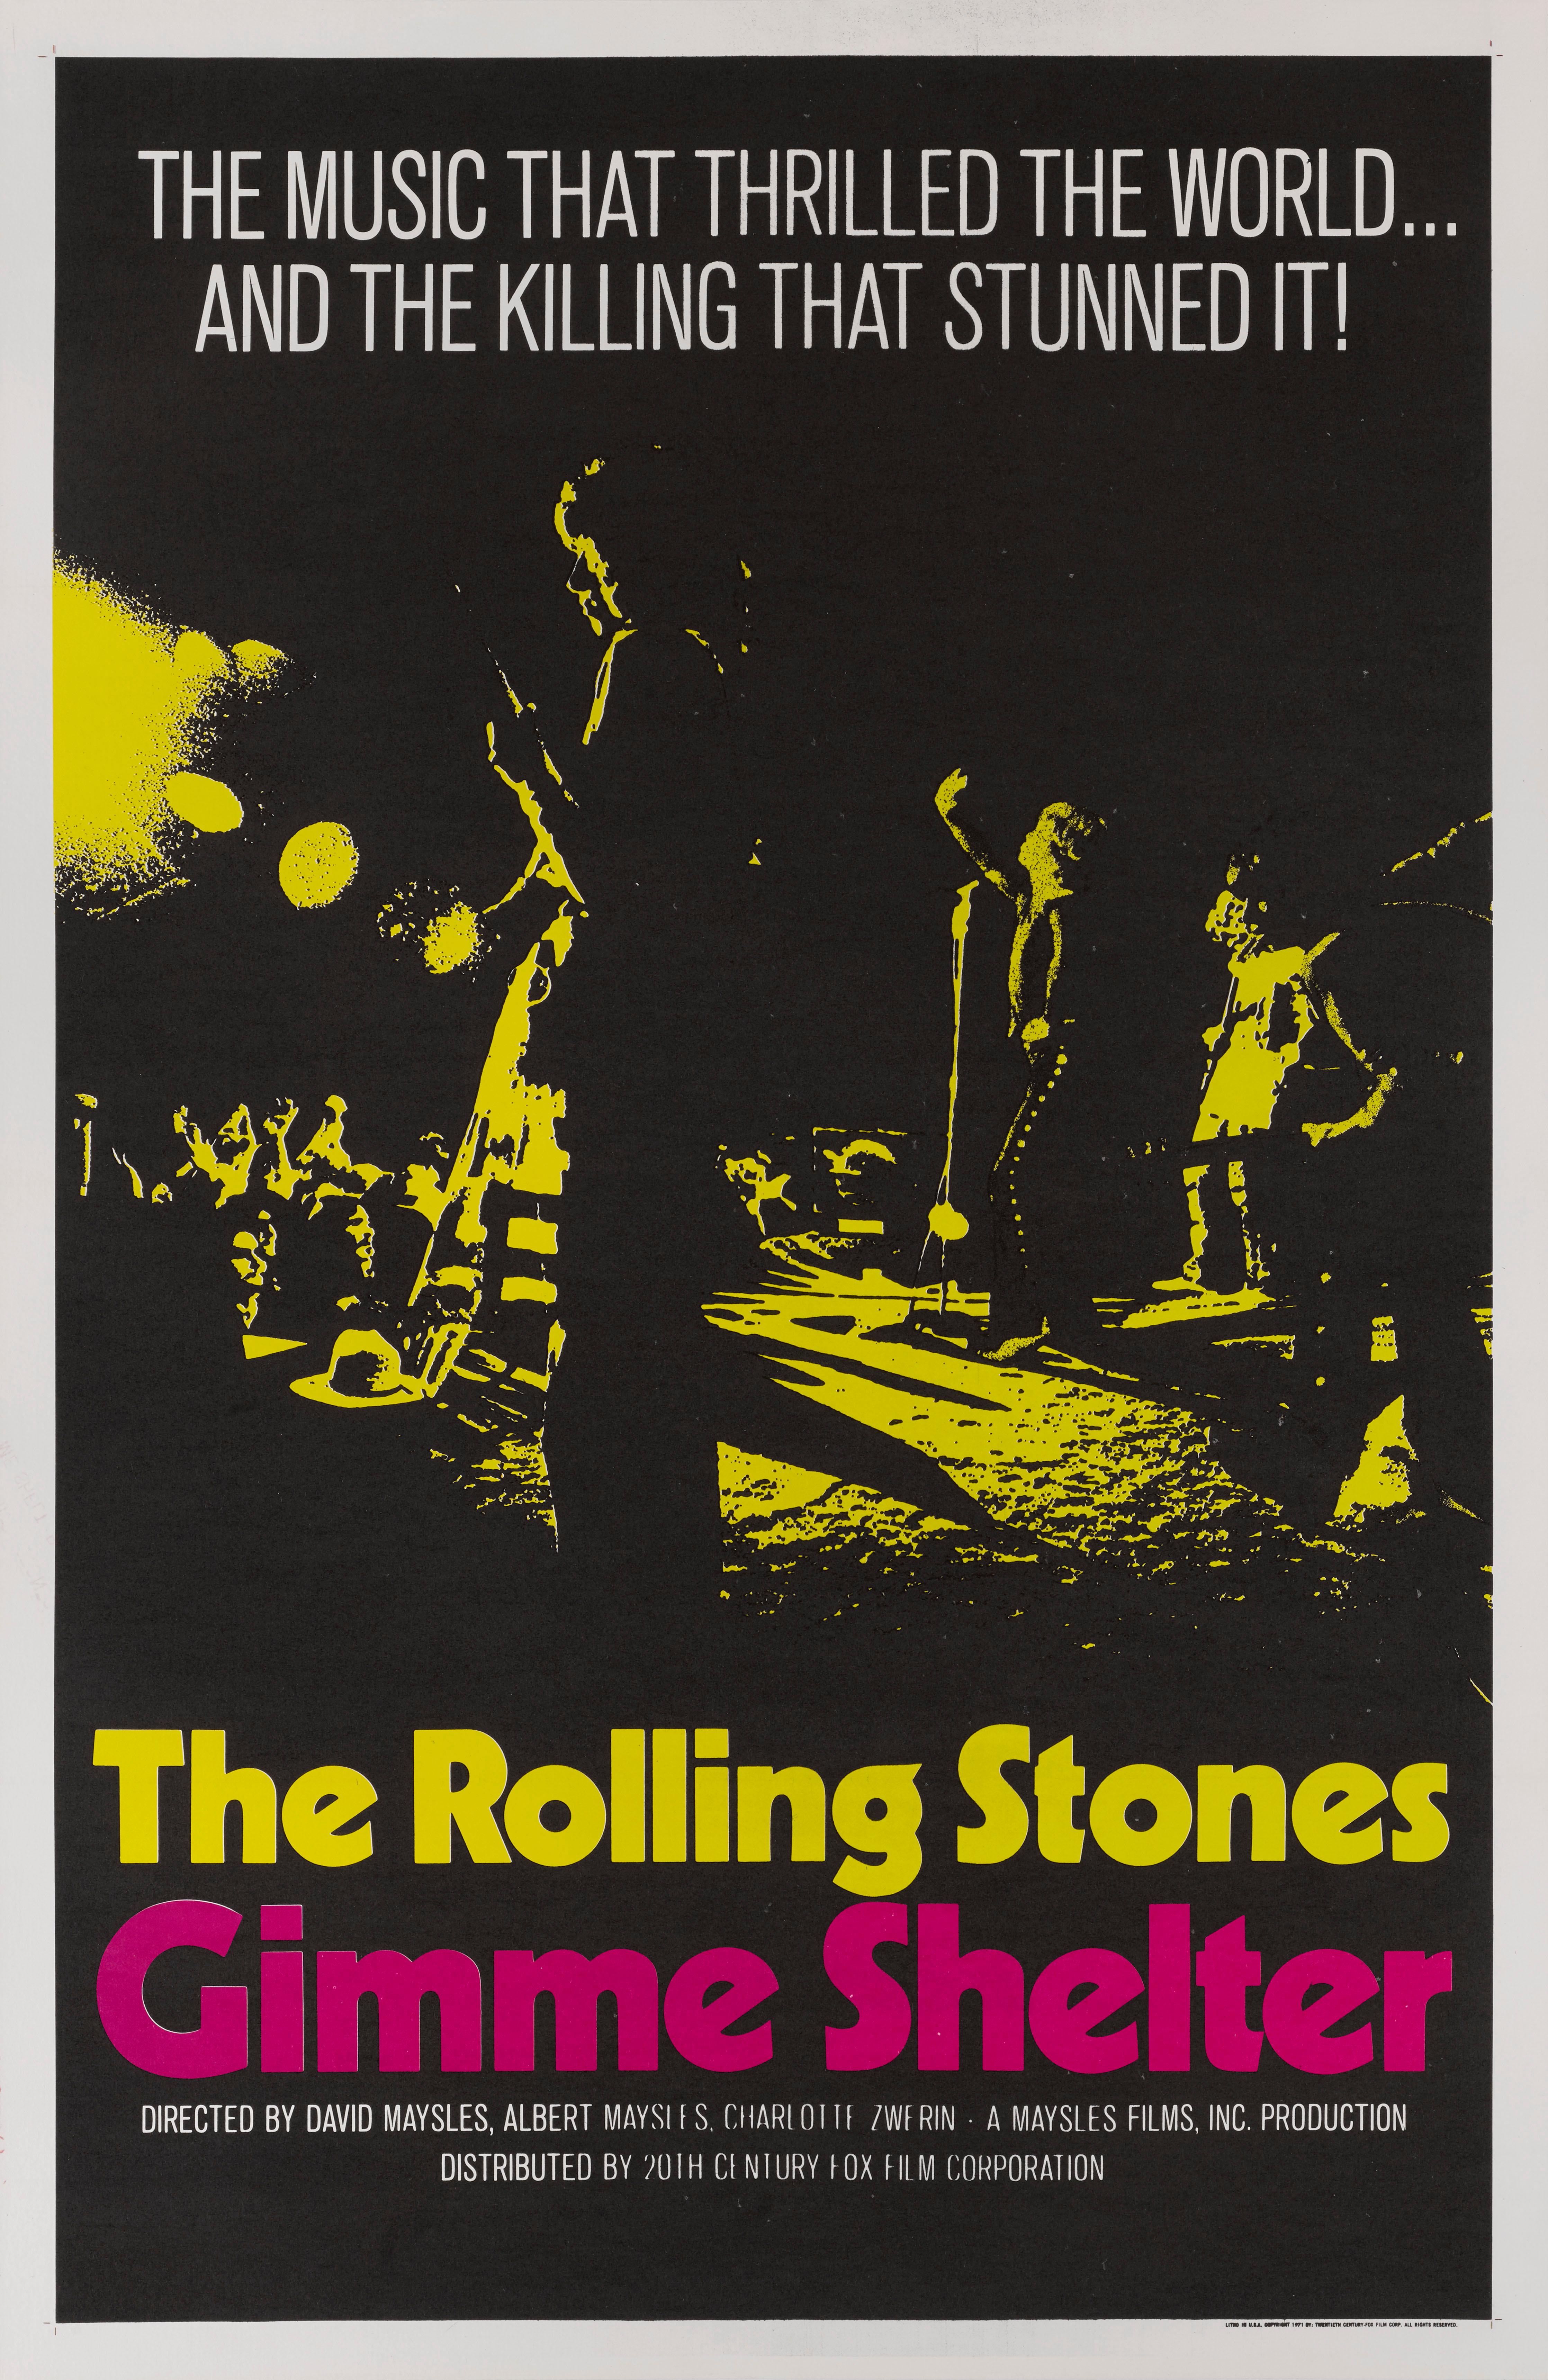 Original US film poster for the 1970 rock documentary directed by directed by Albert and David Maysles and Charlotte Zwerin
The documentary chronicling 1969 tour and the tragic Altamont free concert. The film name was taken from the stones lead